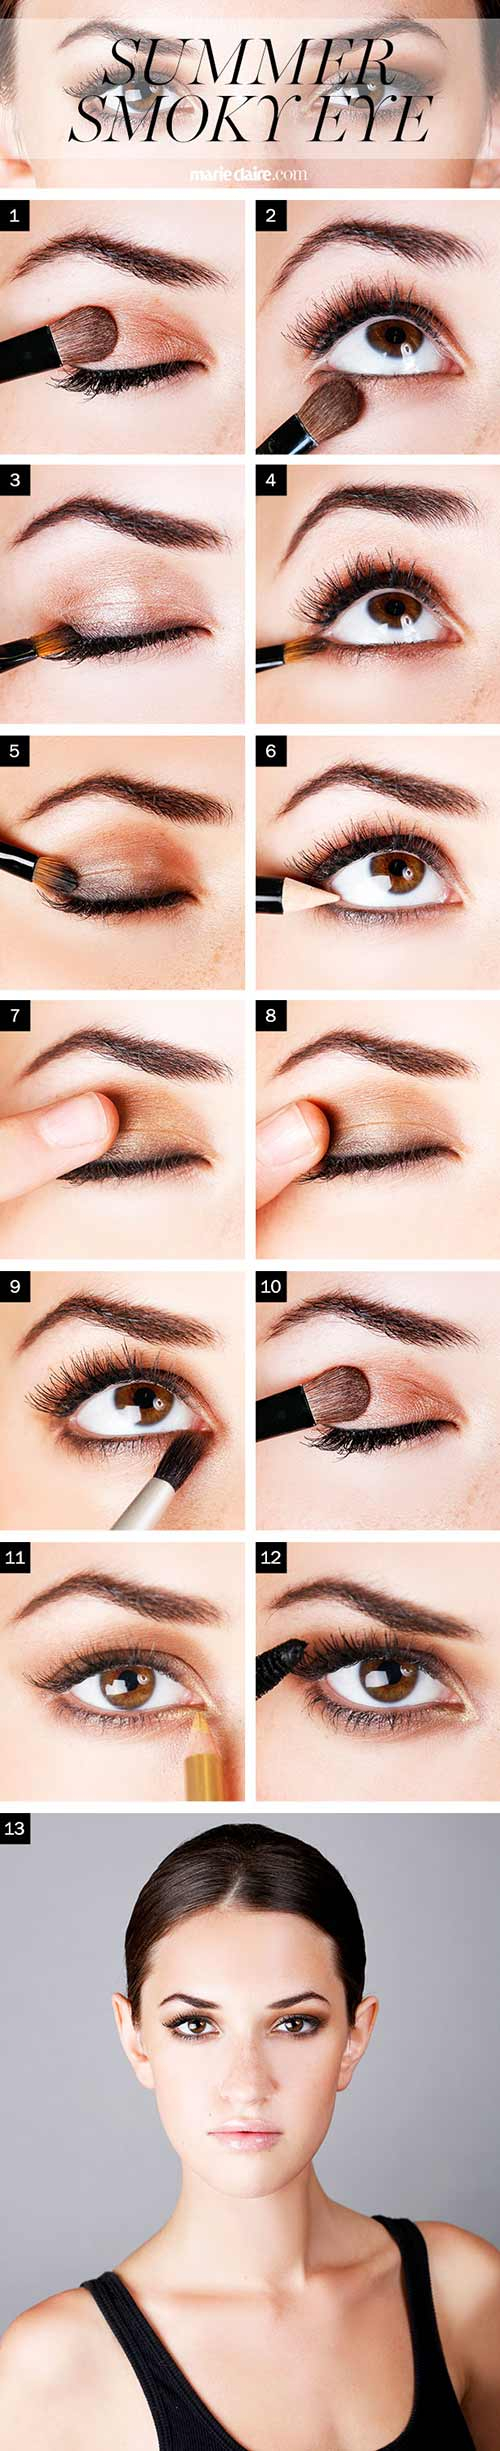 Smokey Under Eye Makeup How To Do Smokey Eye Makeup Top 10 Tutorial Pictures For 2019